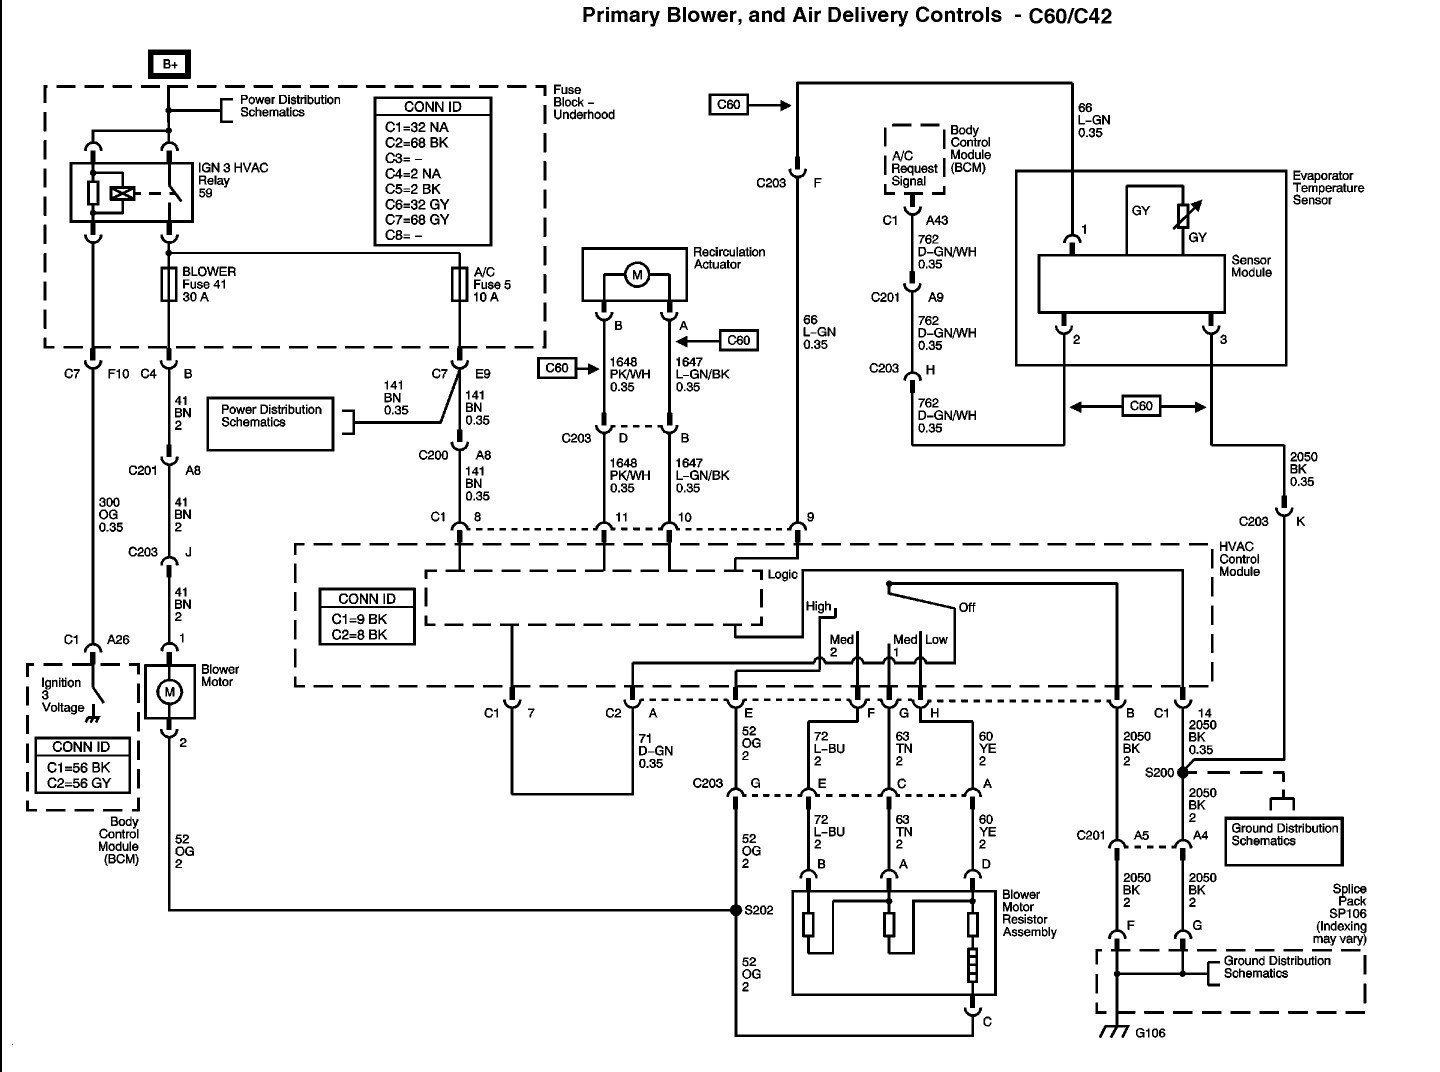 Wiring Diagram For Blower Motor Resistor Fitfathers Me Fine 2004 In Chevy Silverado